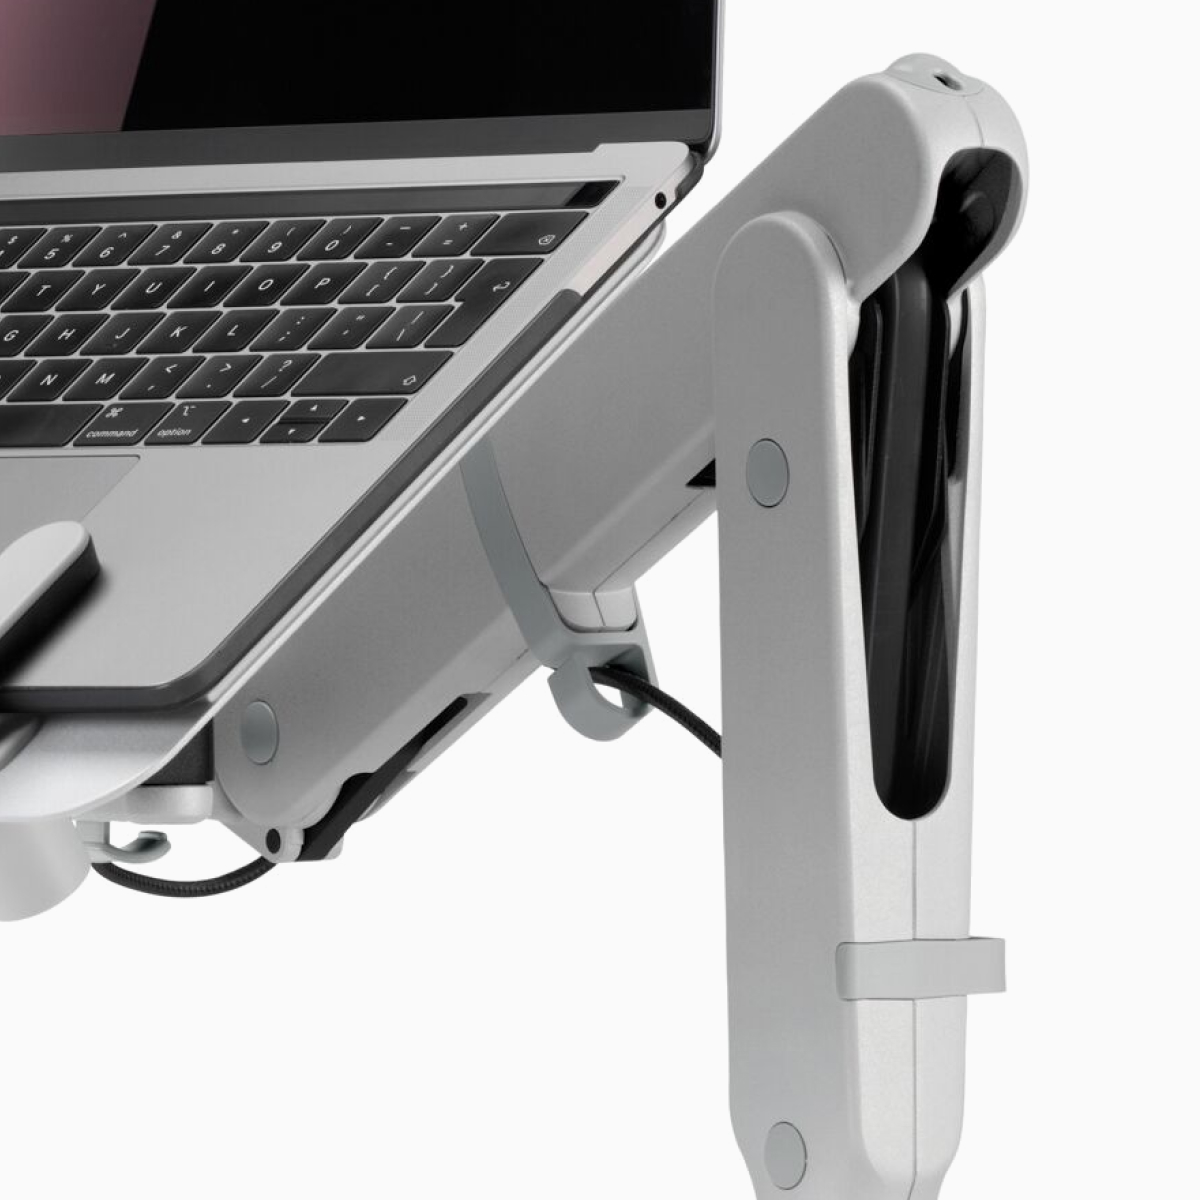 A close-up view showing a front section of an open laptop raised to eye level and supported by Ollin Laptop Mount and Ollin Monitor Arms